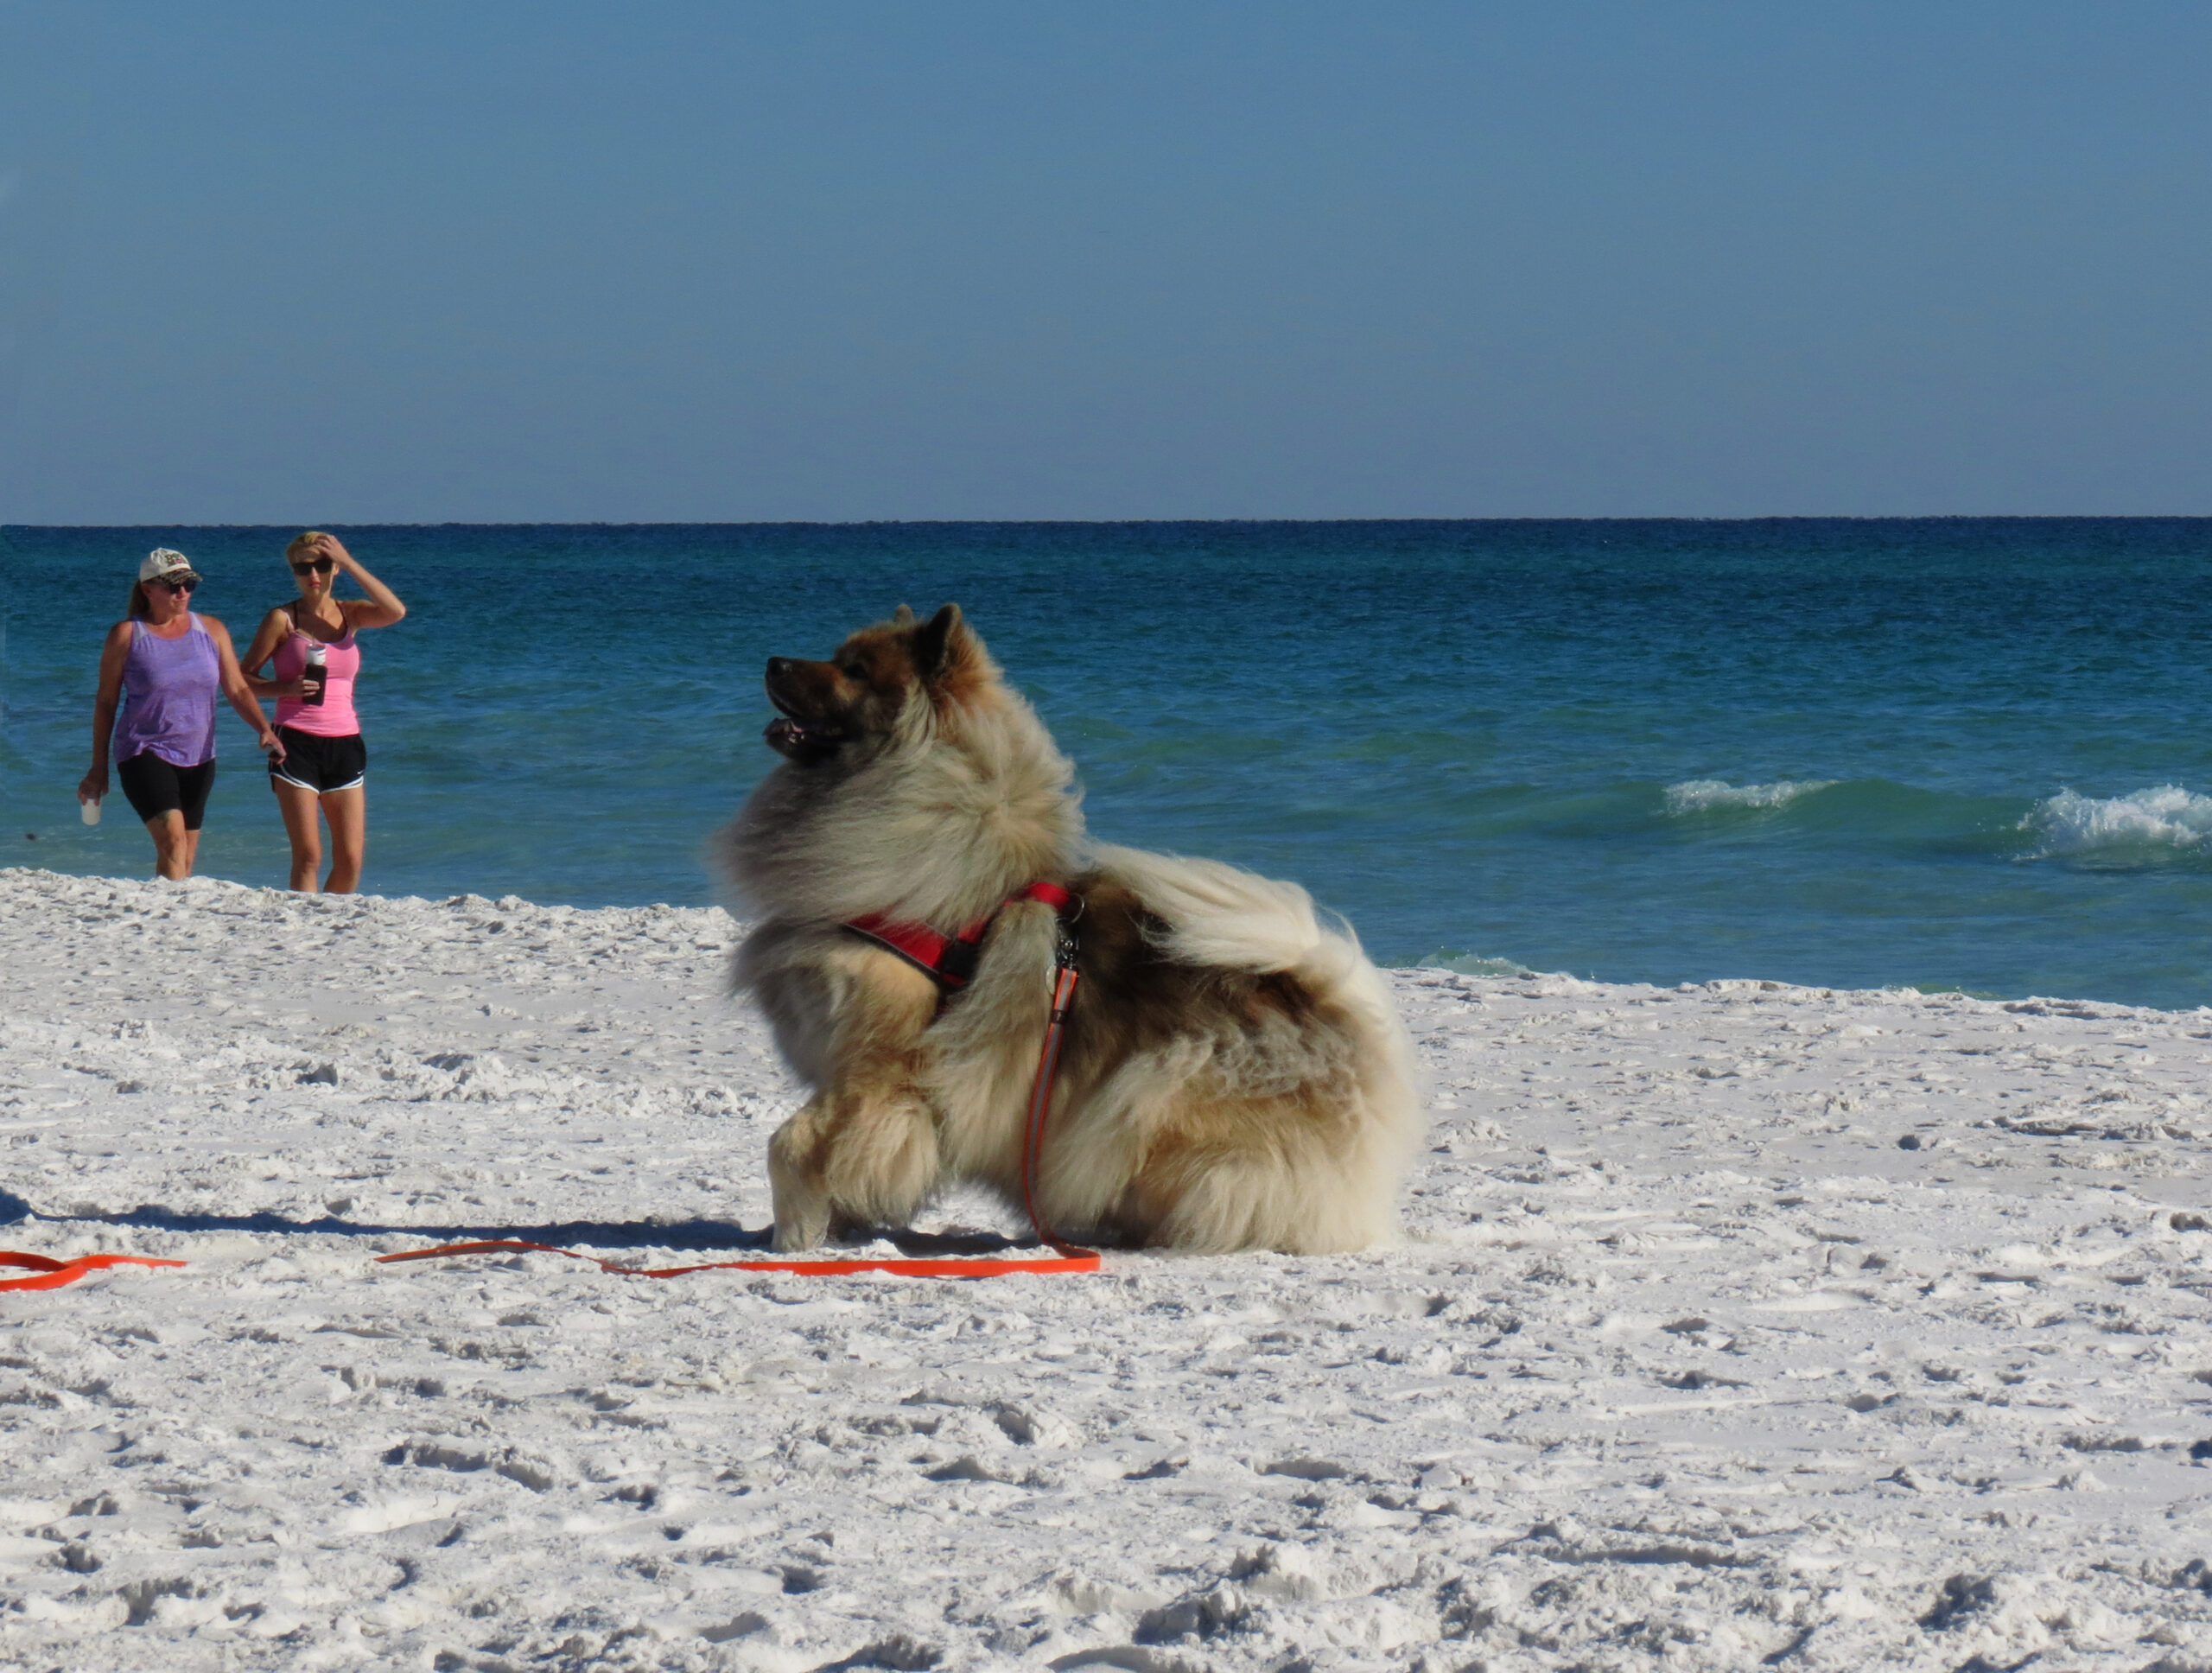 Cosmo is an international flying snowdog who lives in Germany and has made seven round trips to NW Florida since he was a pup 